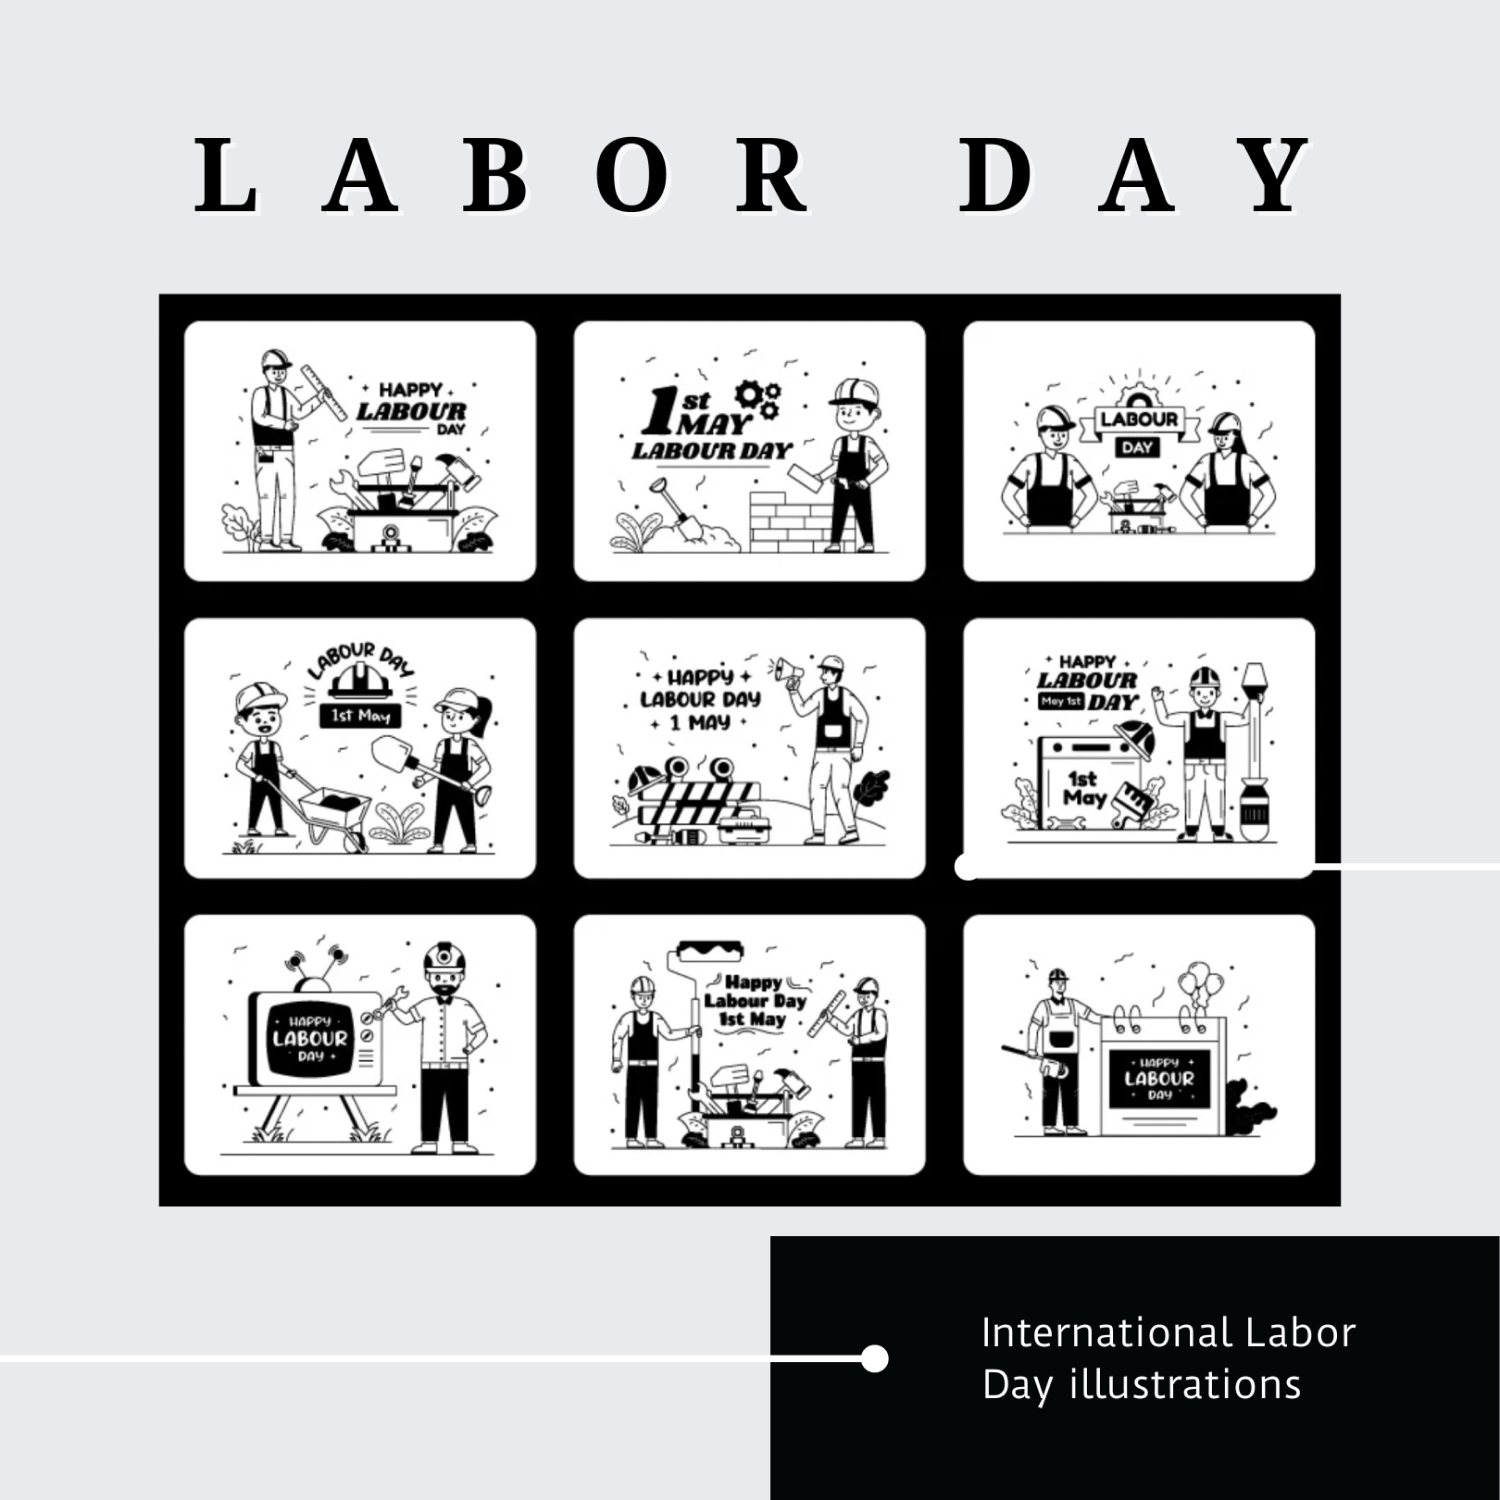 Preview international labor day illustrations.